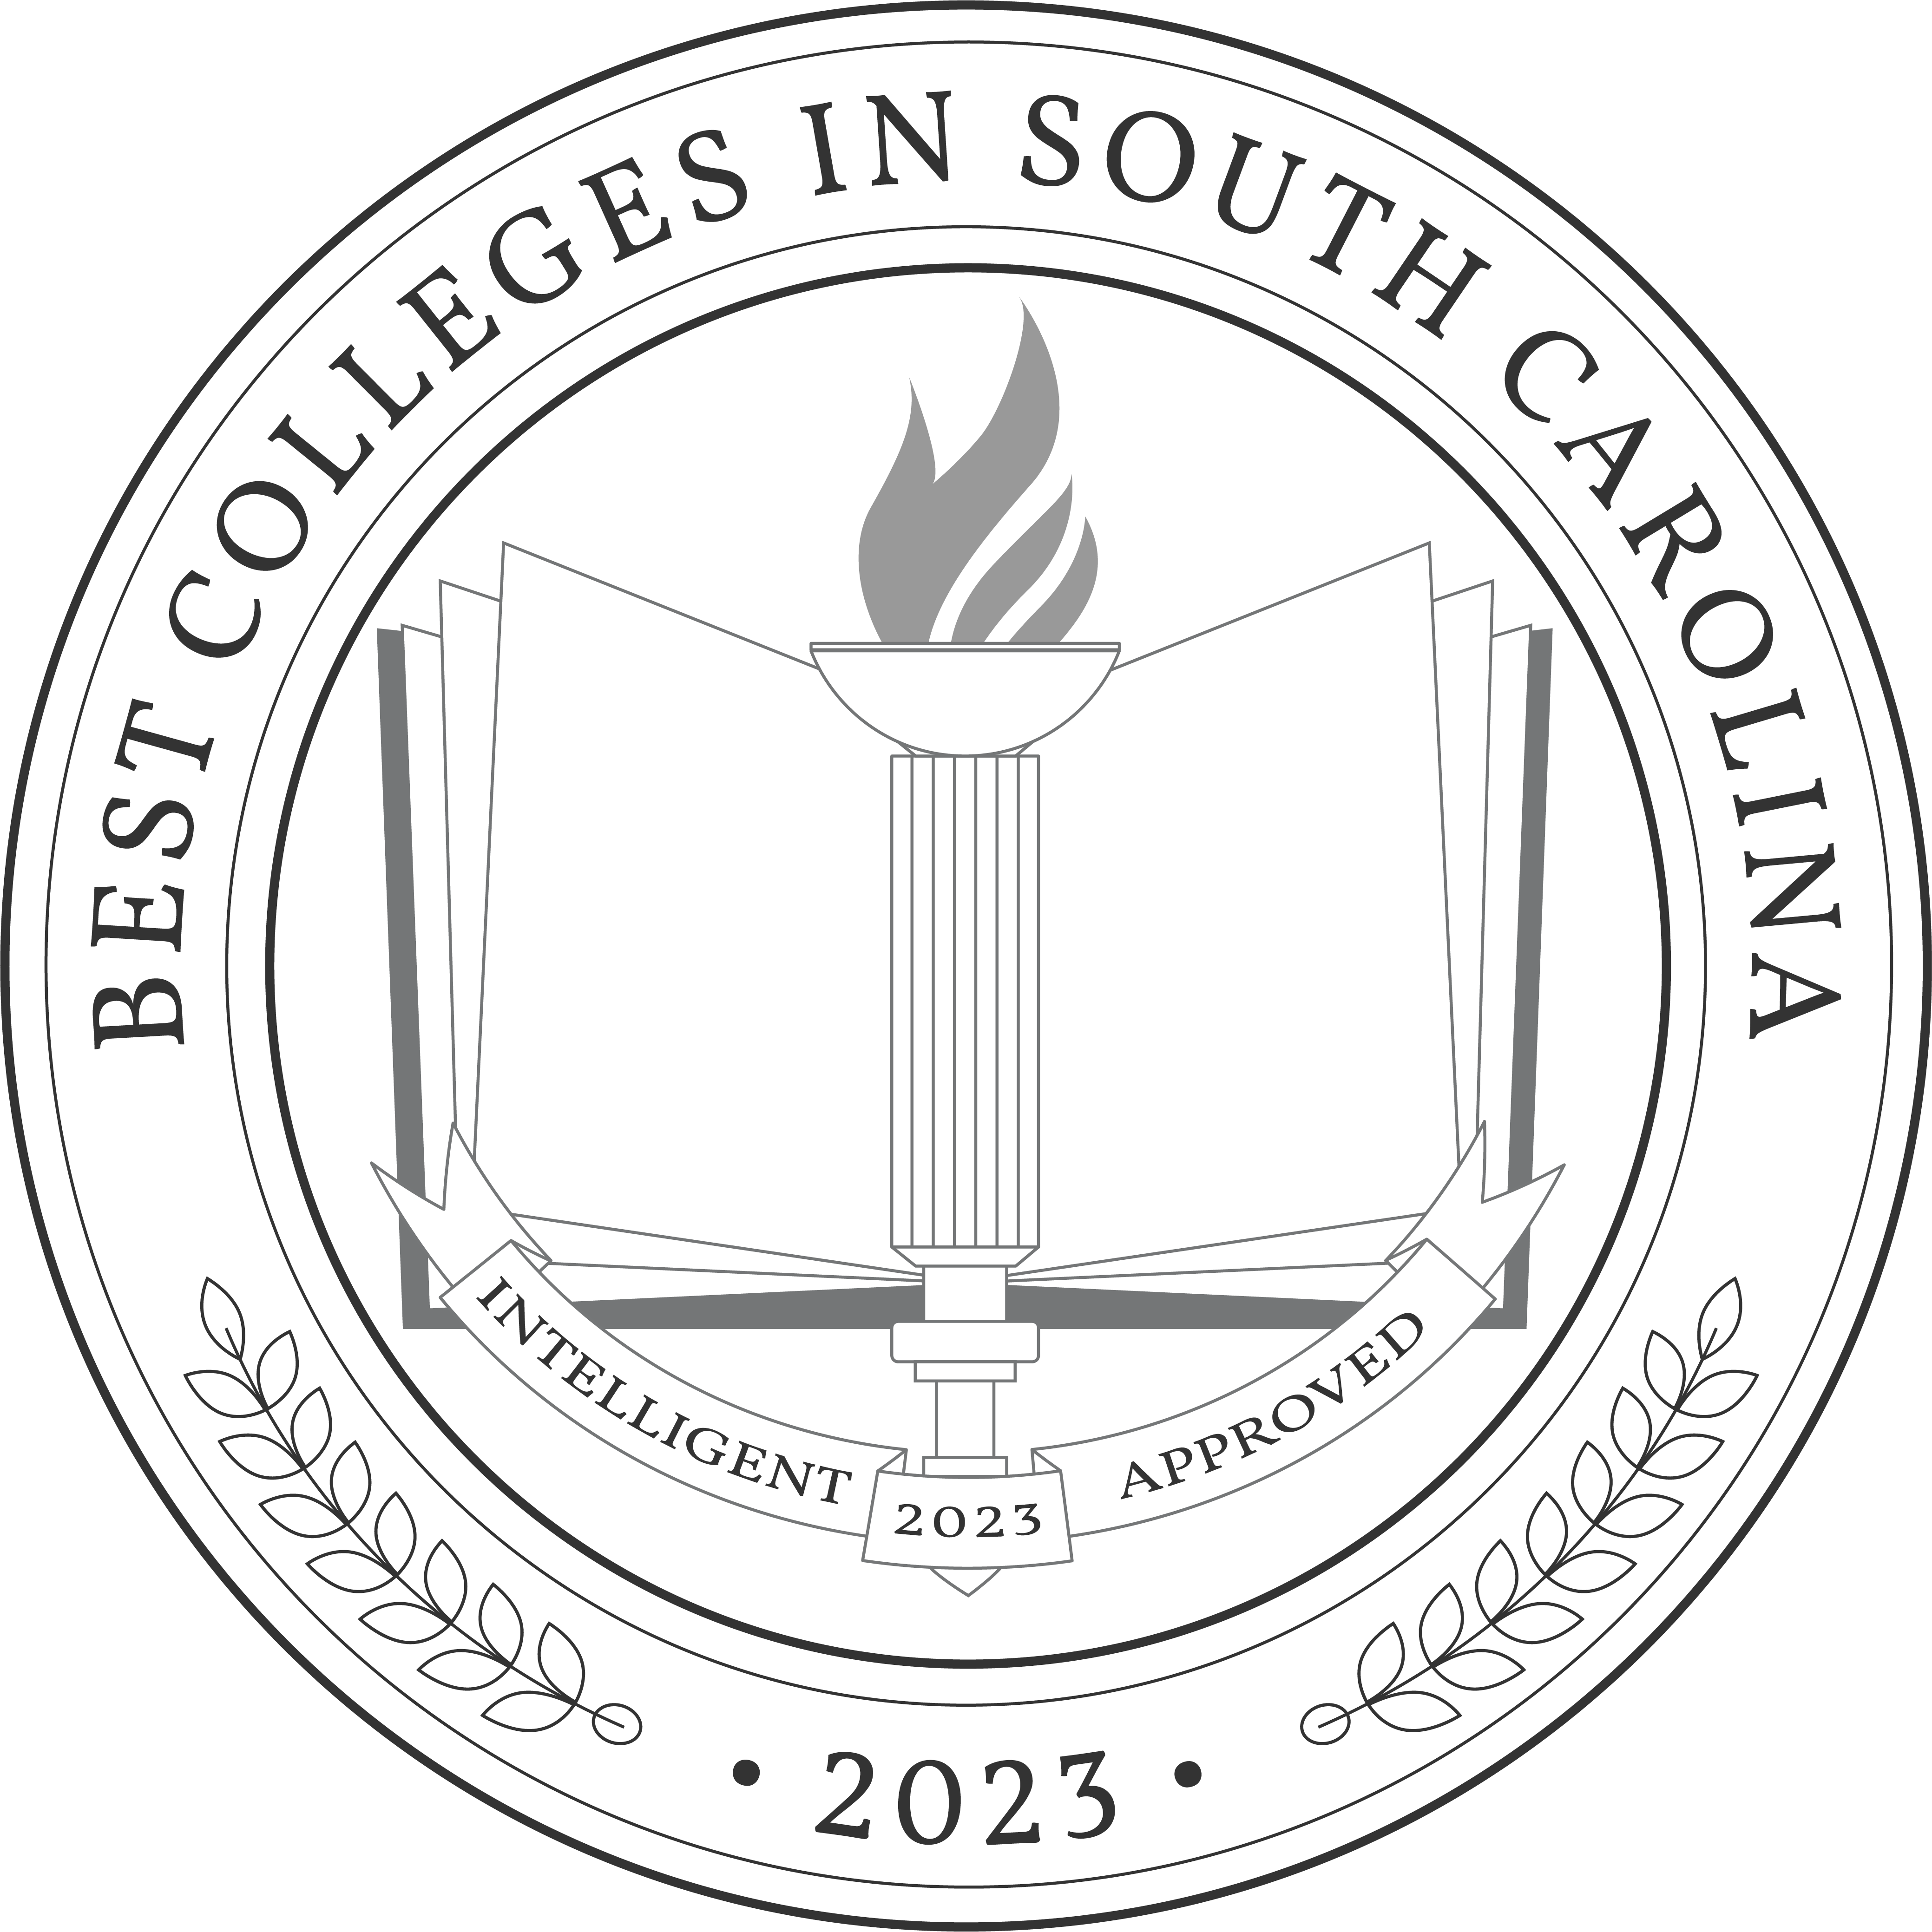 Best Colleges in South Carolina 2023 Badge